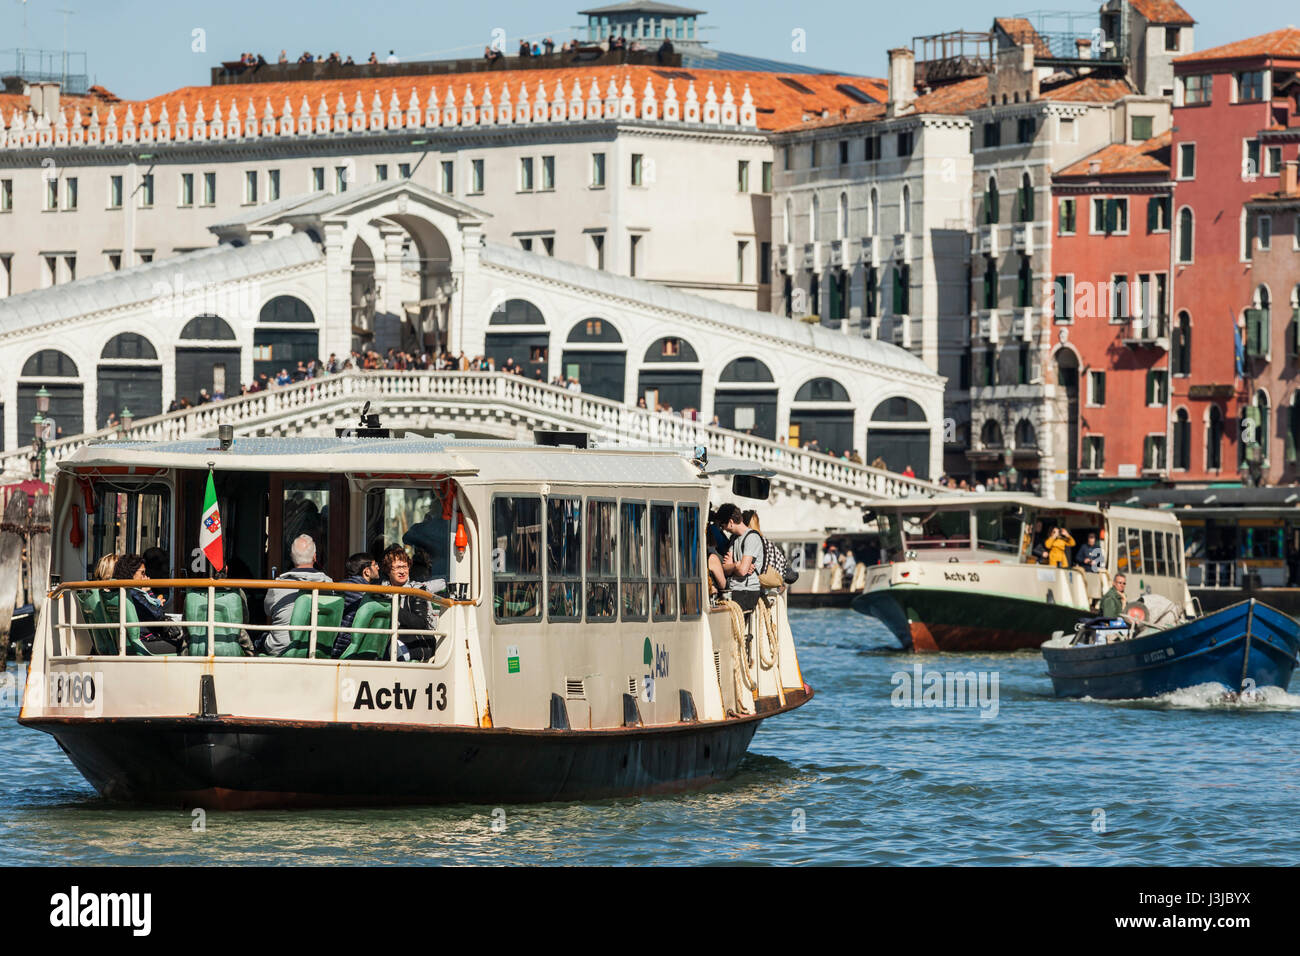 Vaporetto On The Grand Canal In Venice Stock Photo - Download